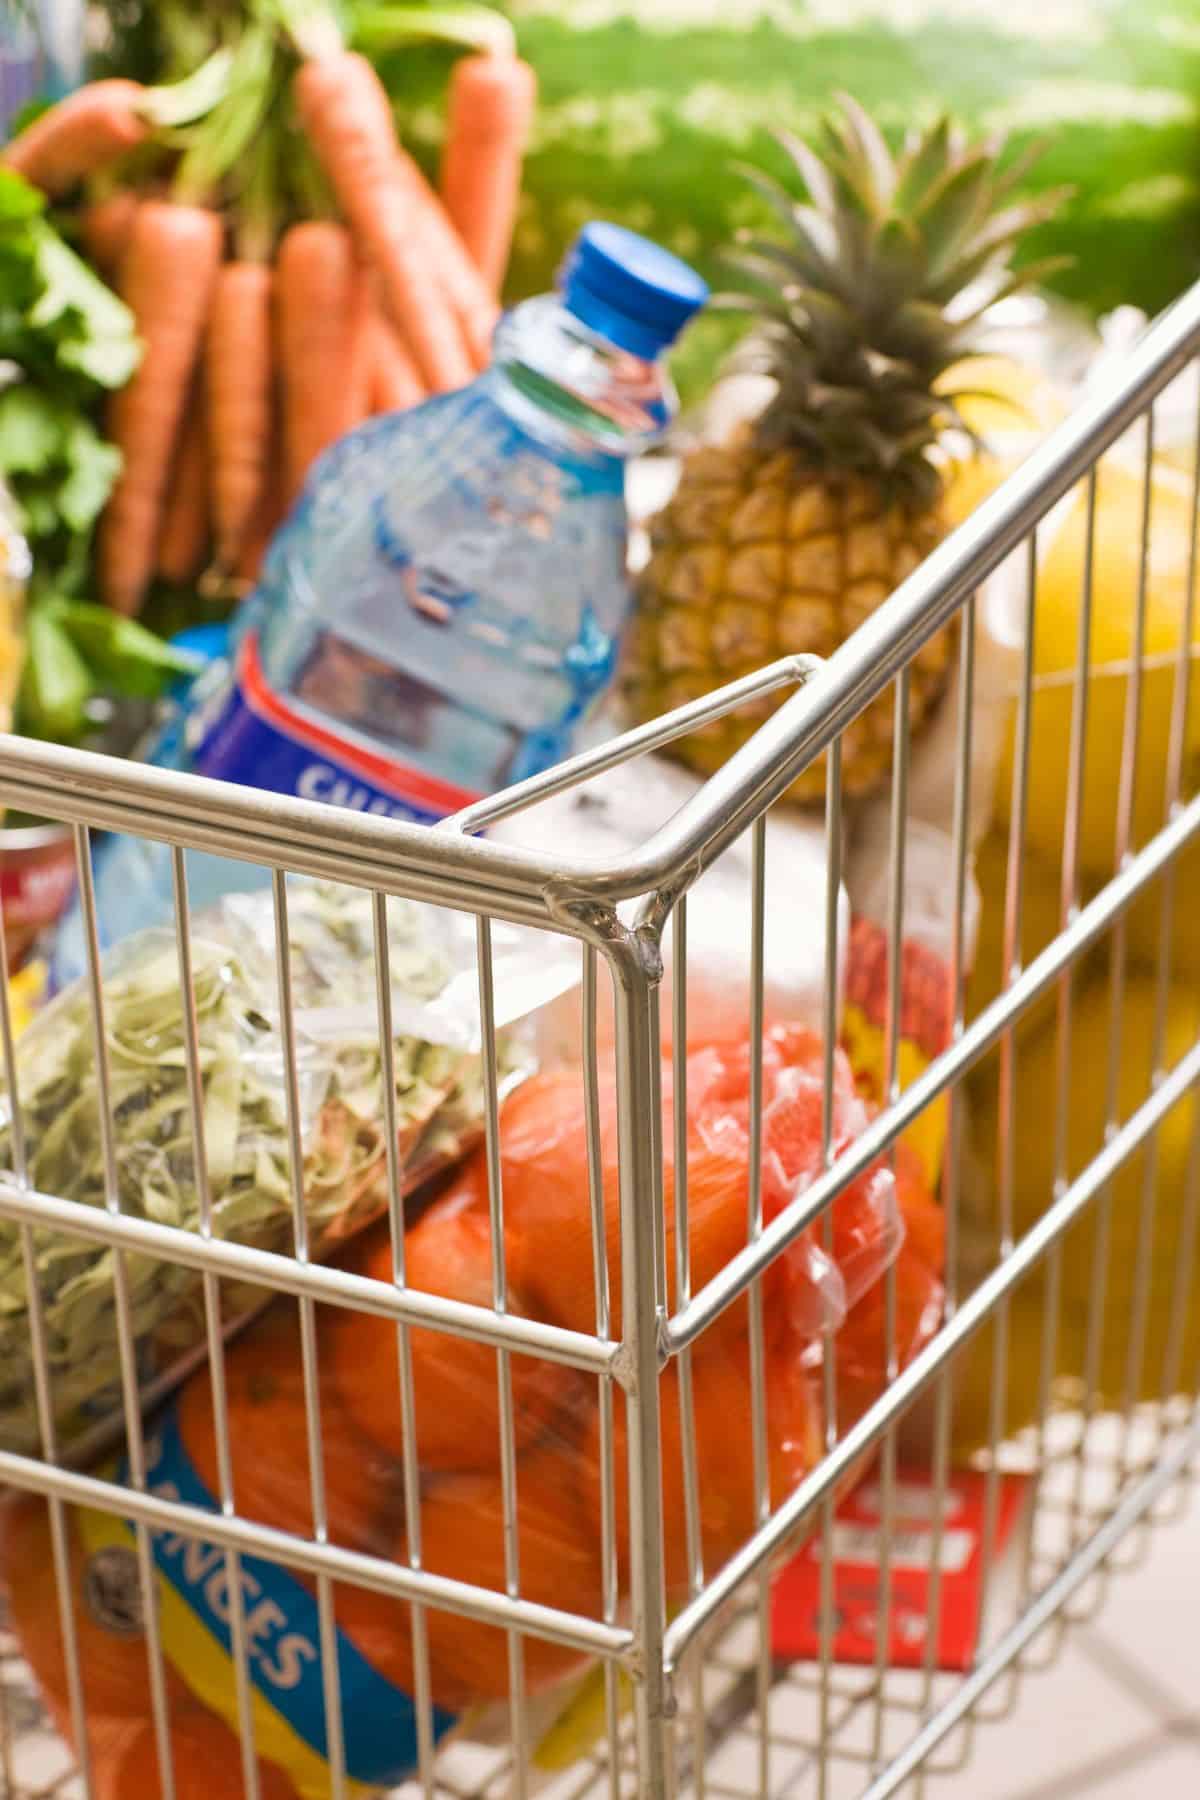 A grocery card with produce, water, fruits, and vegetables.